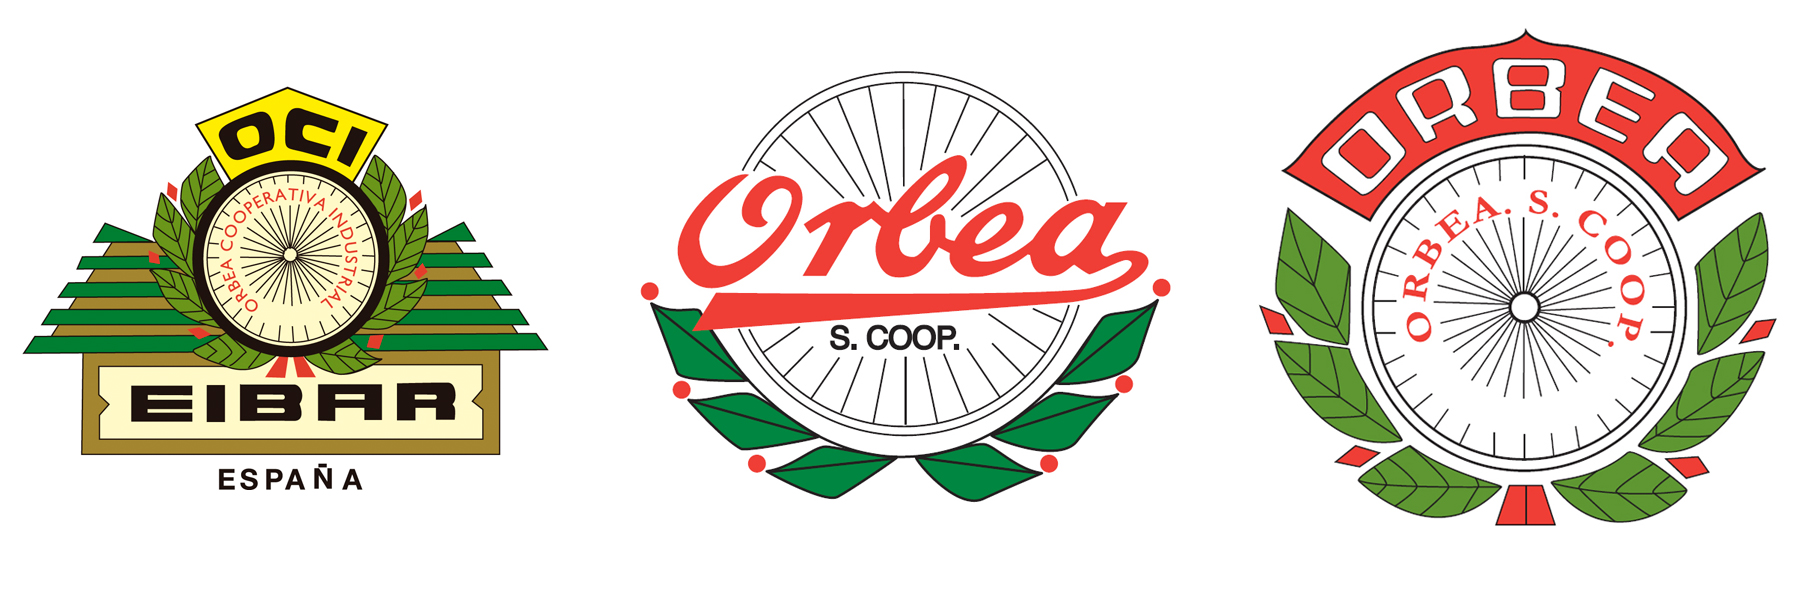 Get to know the history of the Orbea logo! — Orbea